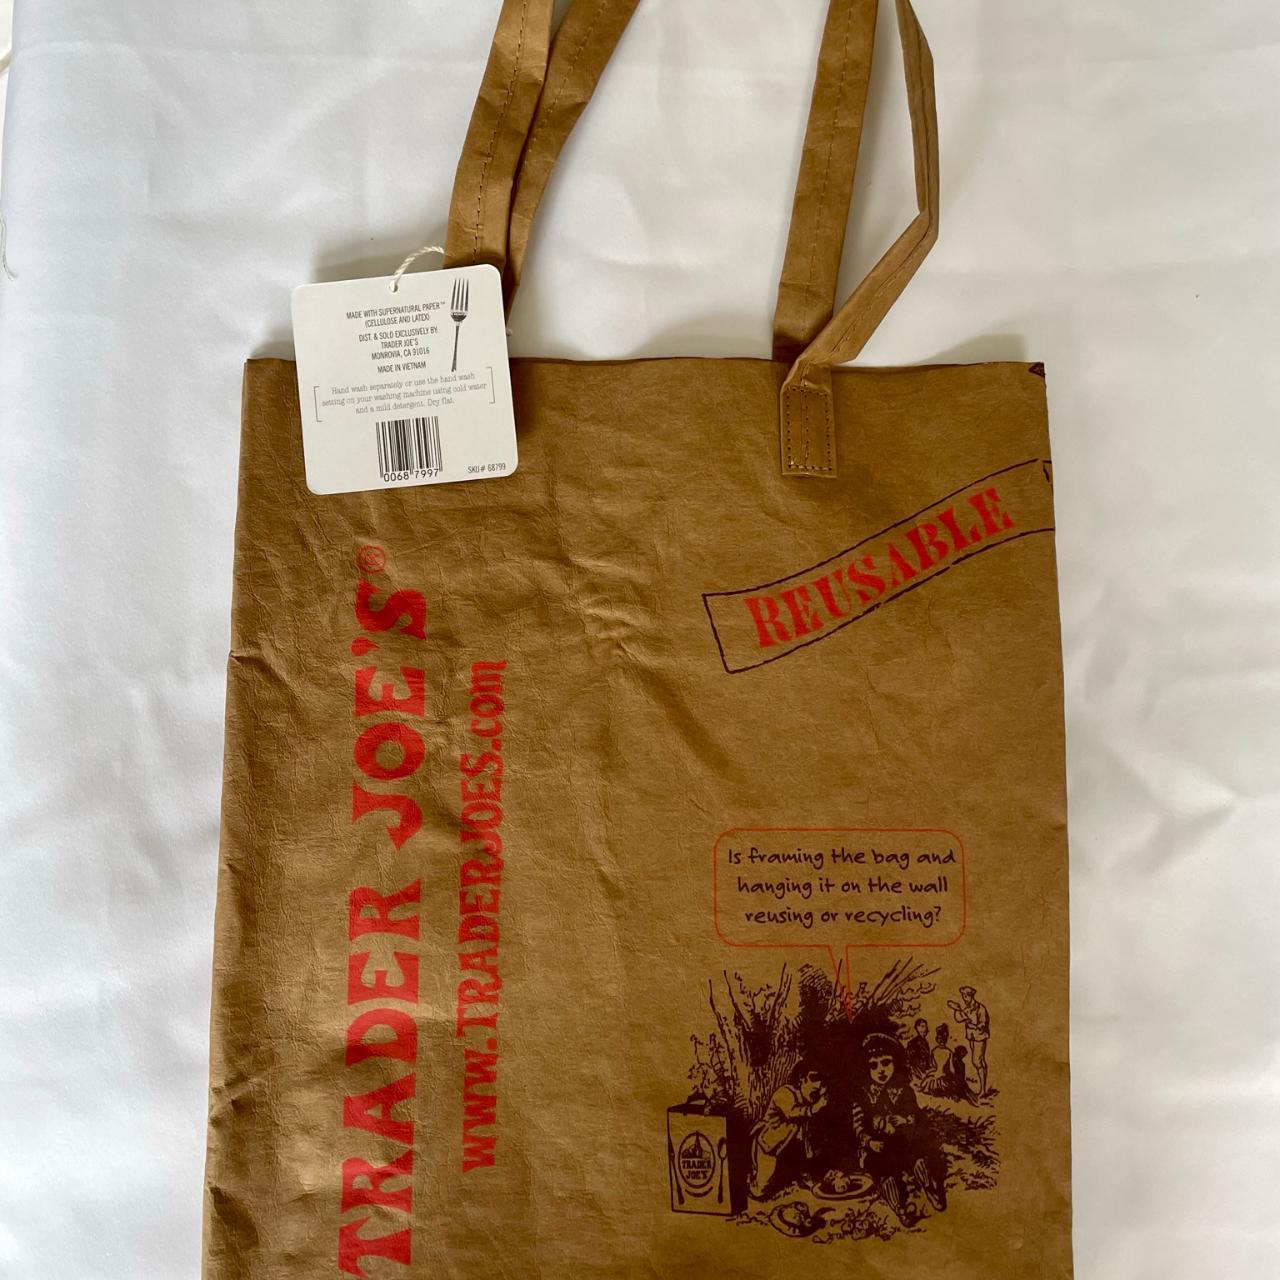 Supreme paper tote bag. Not ever really used this - Depop